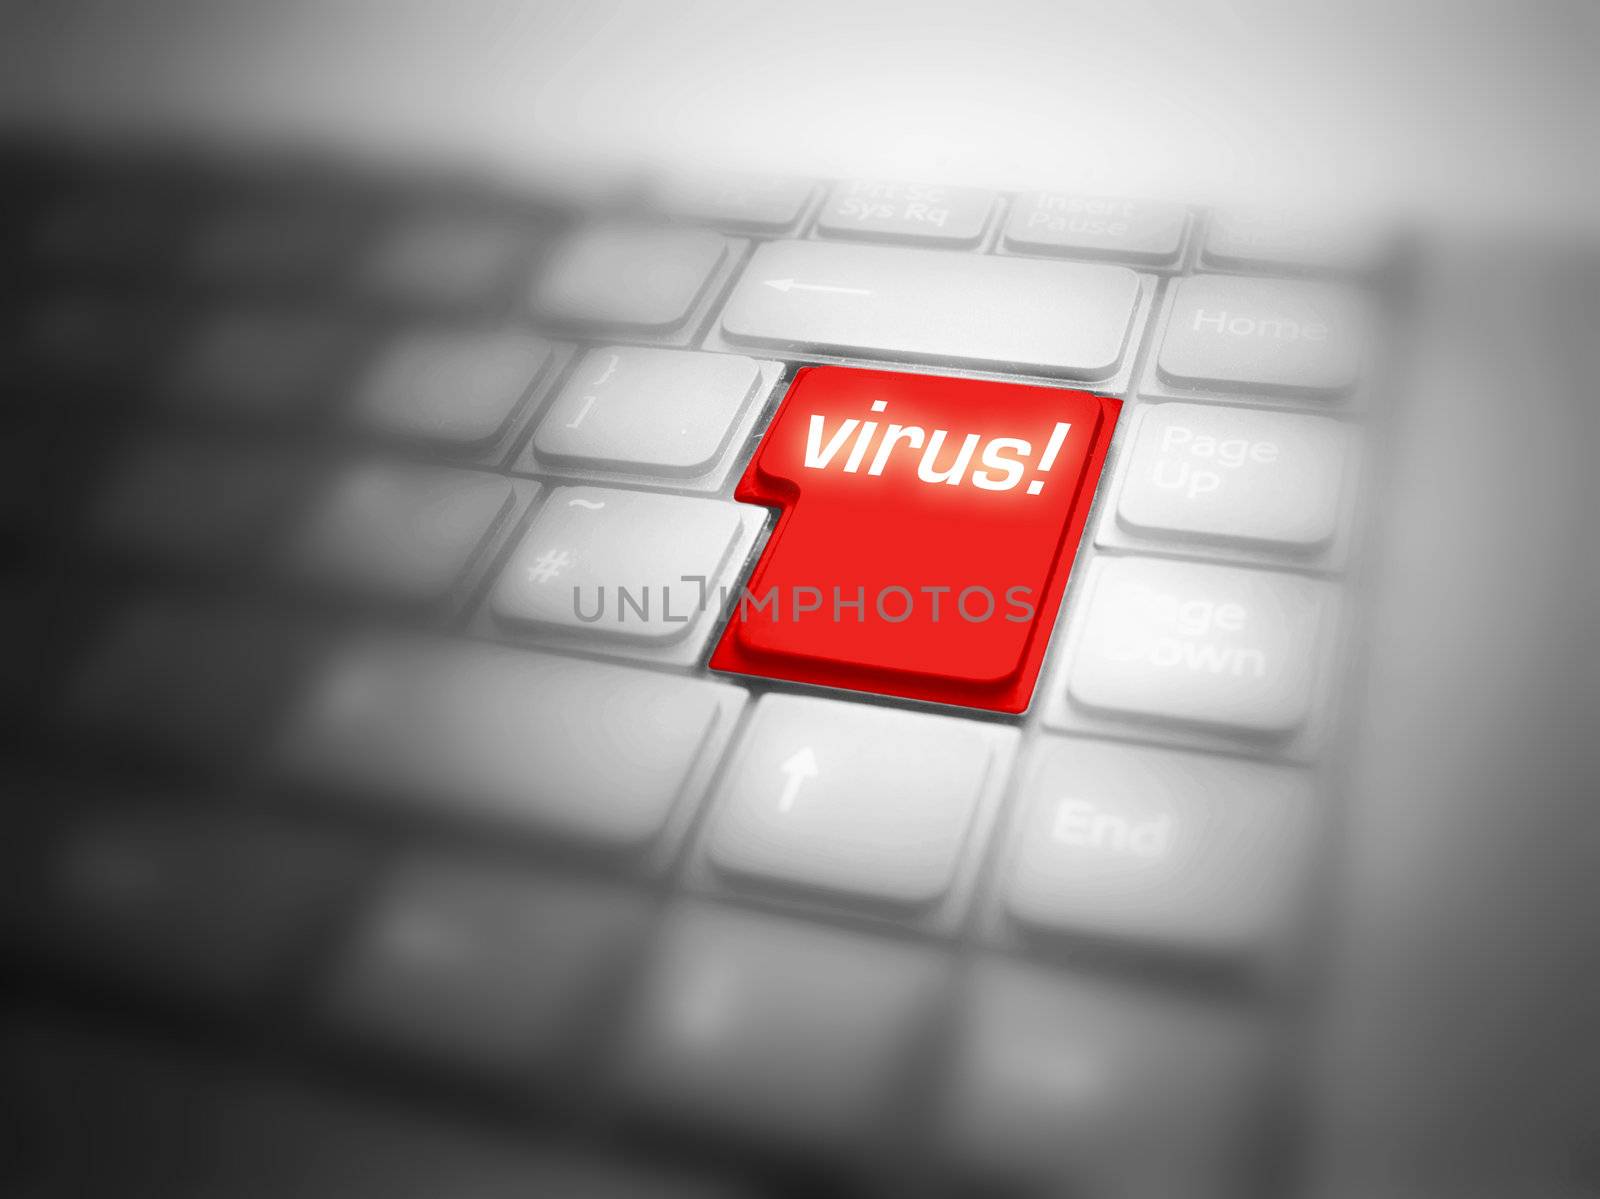 Big red VIRUS! button by photocreo